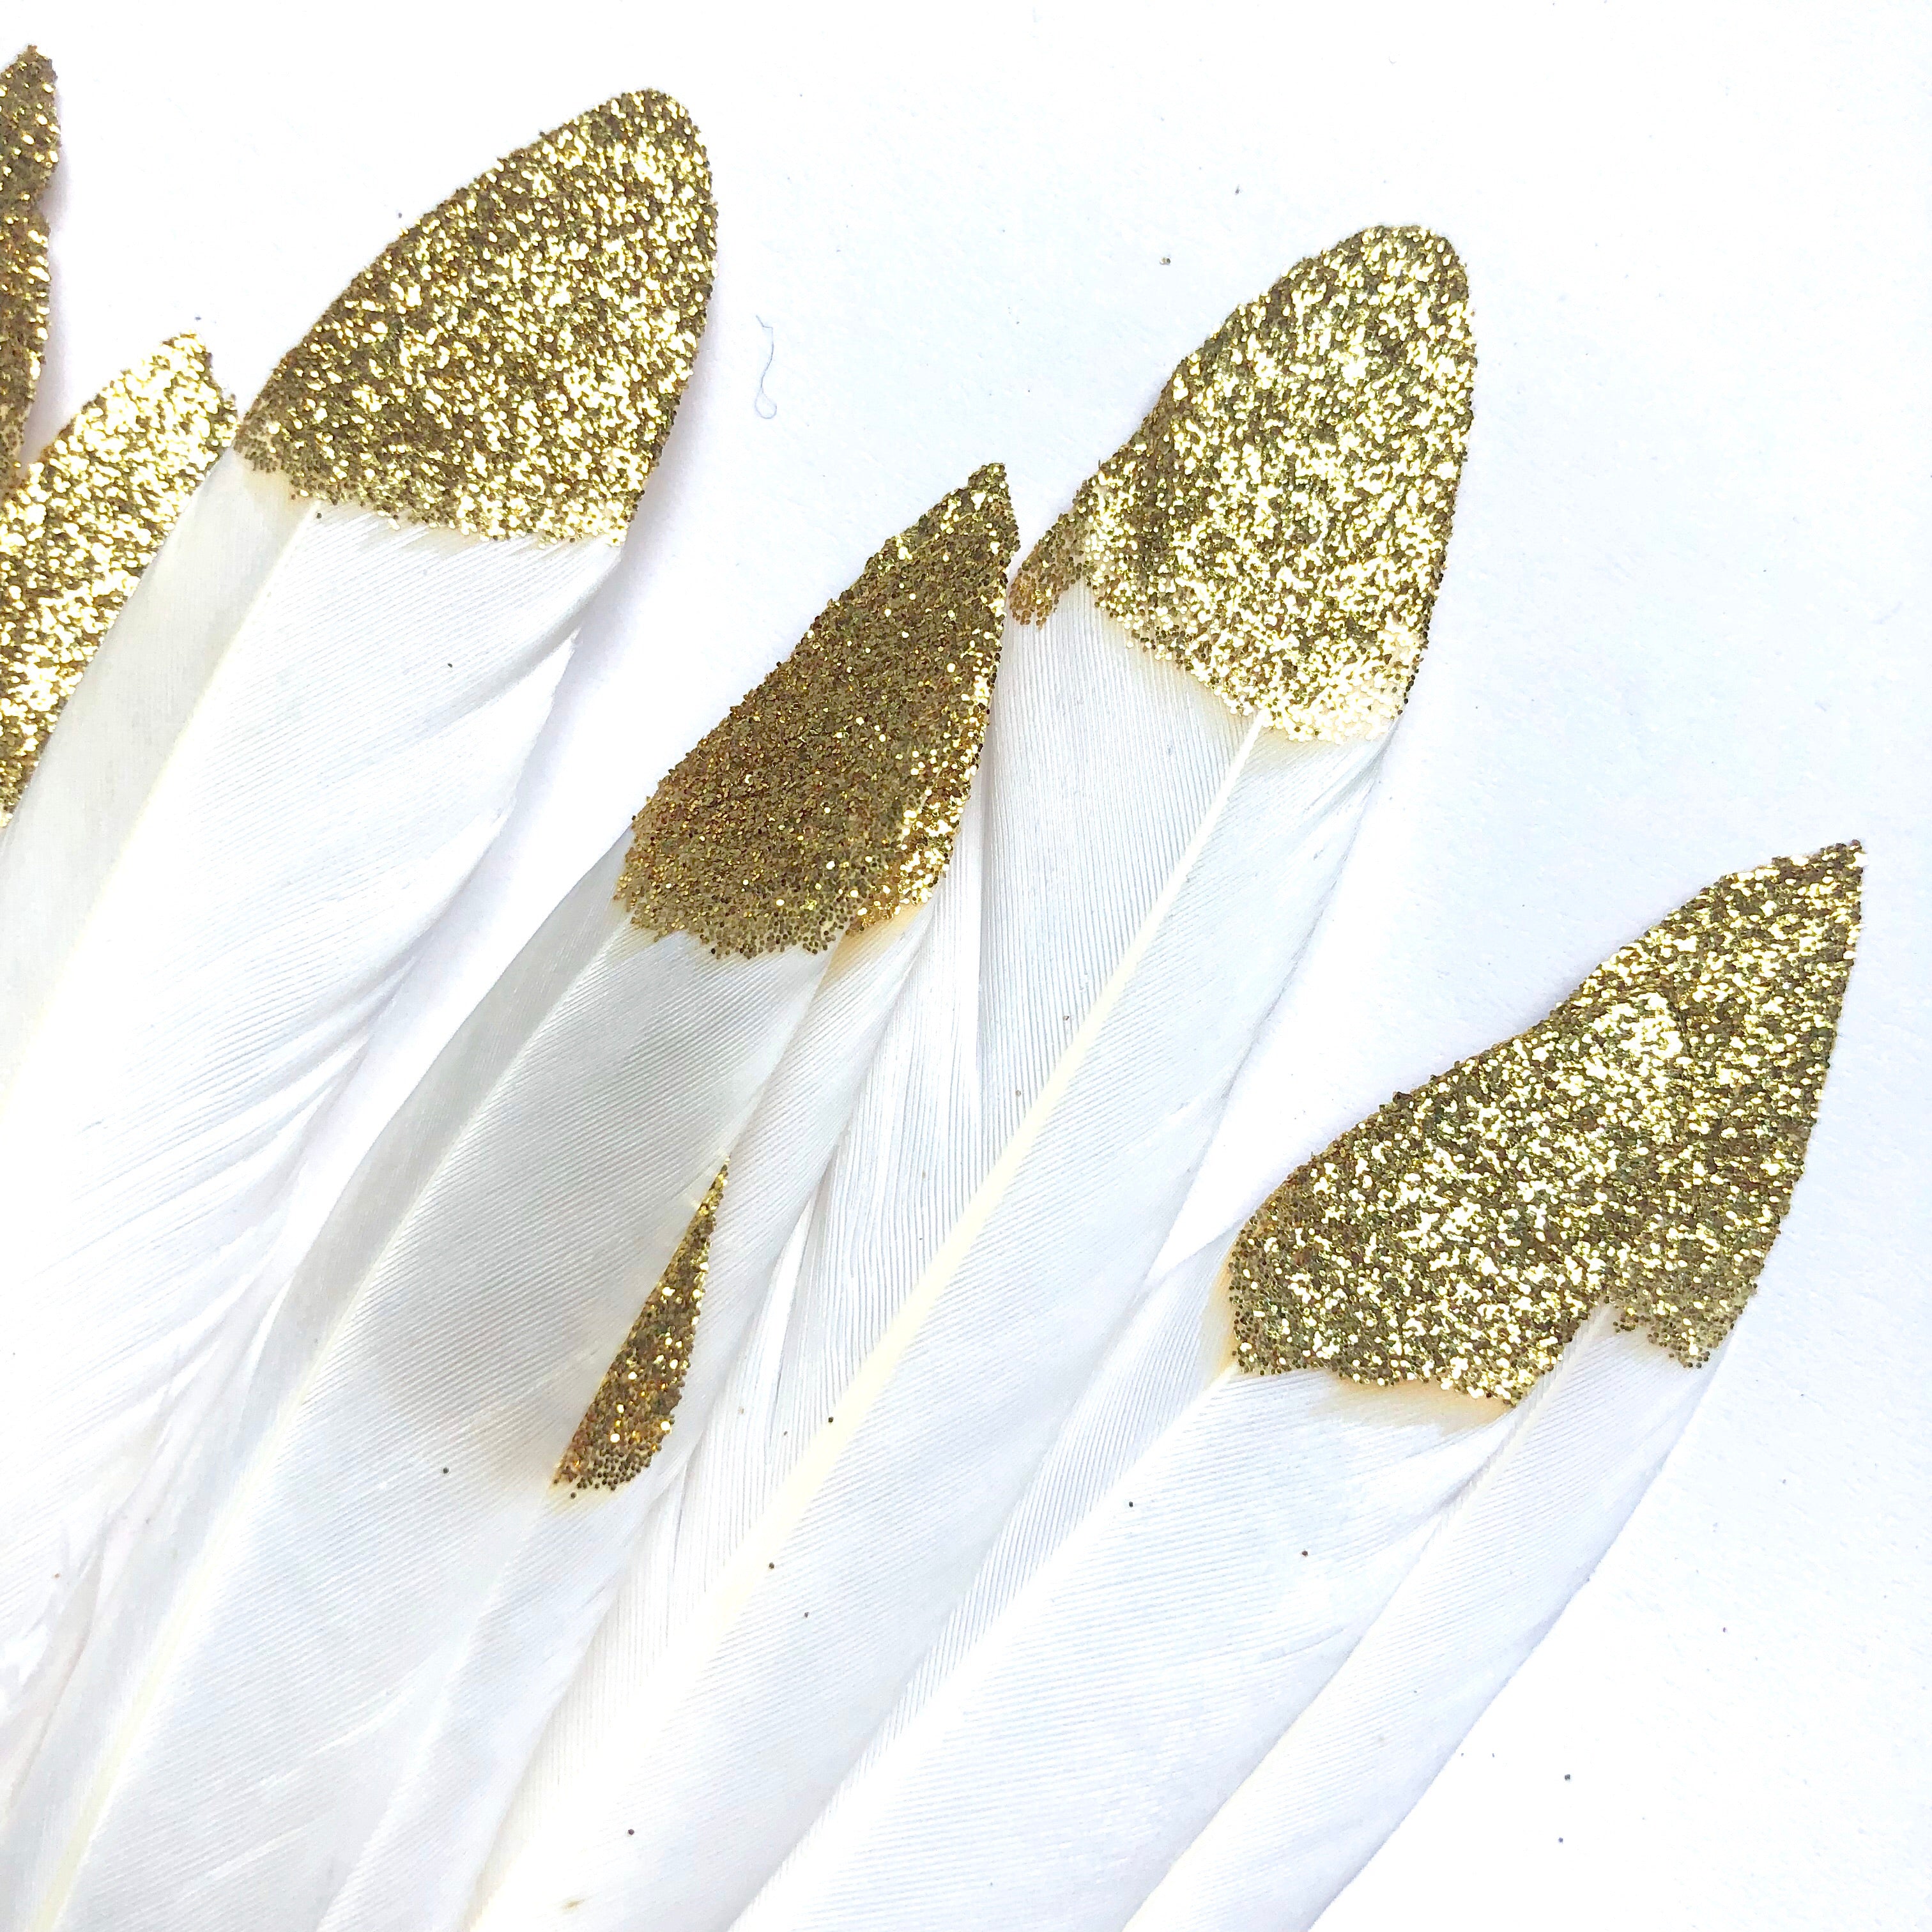 Tiny Goose Pointer Feather White Gold Glitter Tipped x 10 pcs - Style 32